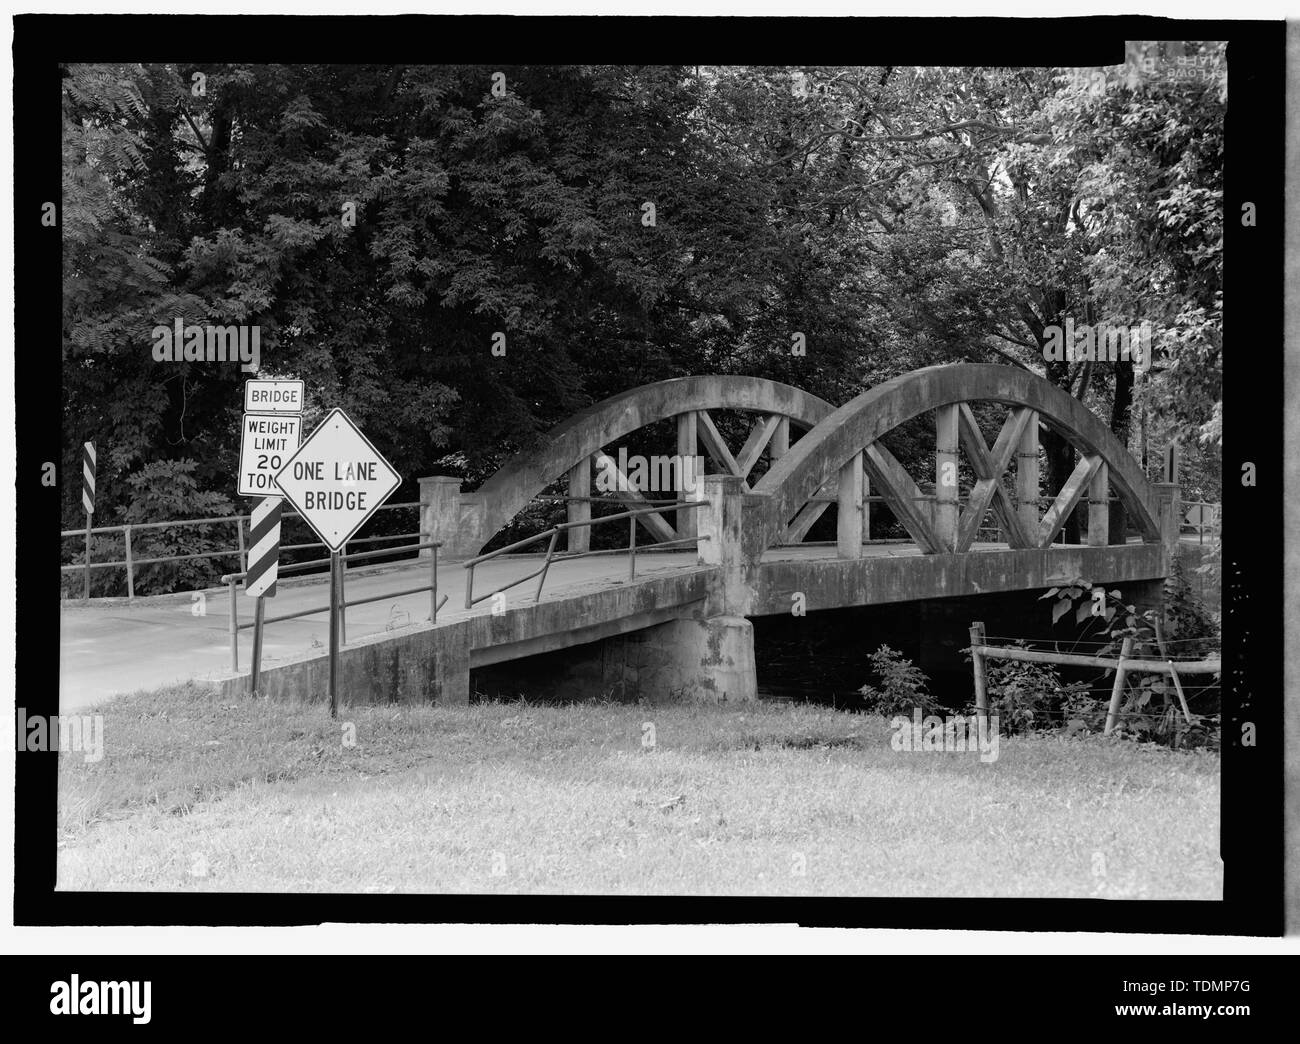 Perspective view NW by 310. Note the concrete pier extending from the bridge in the foreground. This way to allow maximum water flow during floods and rainy periods. - Weaverland Bridge, Quarry Road spanning Conestoga Creek, Terre Hill, Lancaster County, PA; Brubaker, John T; Frank H Shaw firm; Shaw, Percy A; Monier, Jean; Wunsch, R; Melan, Joseph; von Emperger, Fritz; Luten, Daniel B; Considere, M A; Jones, Howard M; Marsh, James B; McIlvain, J S; Heart, F A; Kauffmann, Paul D; Christianson, Justine, transmitter; Croteau, Todd, project manager; Flores, Roland, field team project manager; Lowe Stock Photo